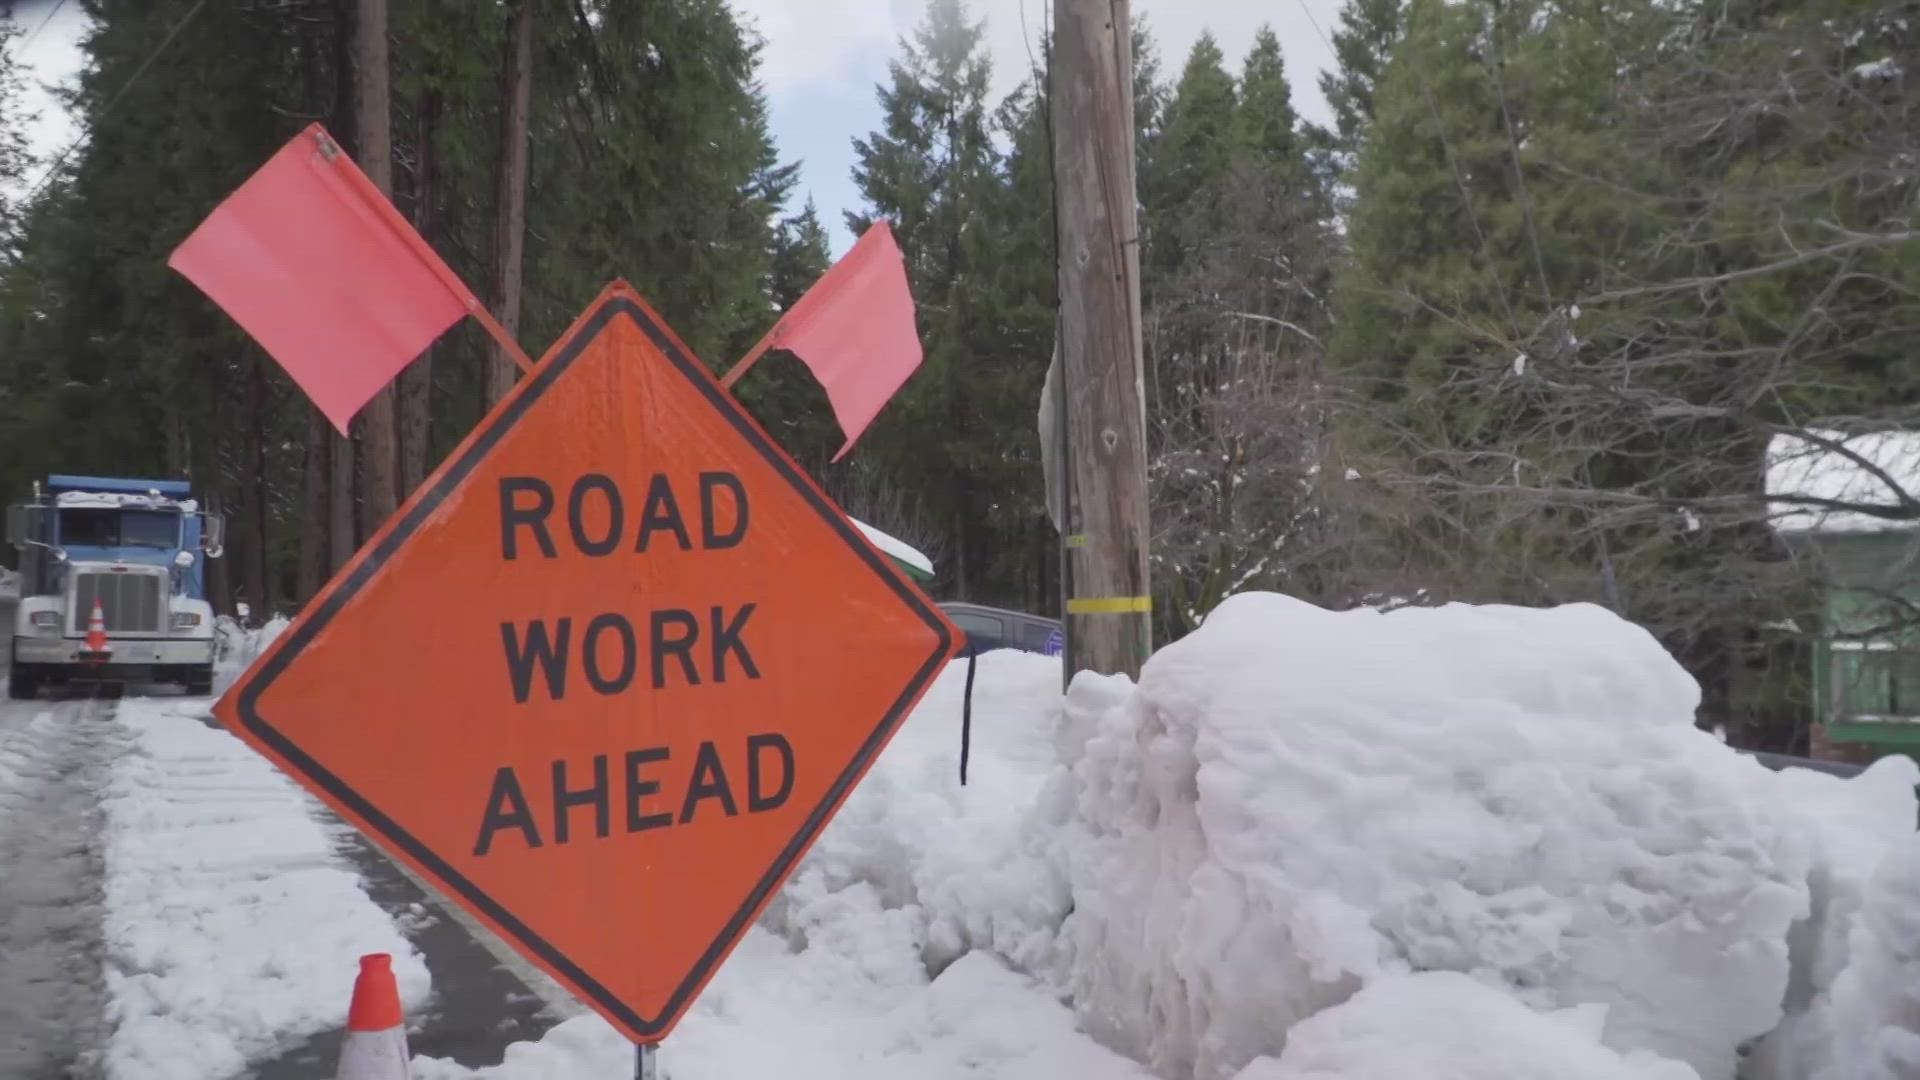 Northern California Storm: I-80 road conditions, Sierras call for resources | March 5, 2023